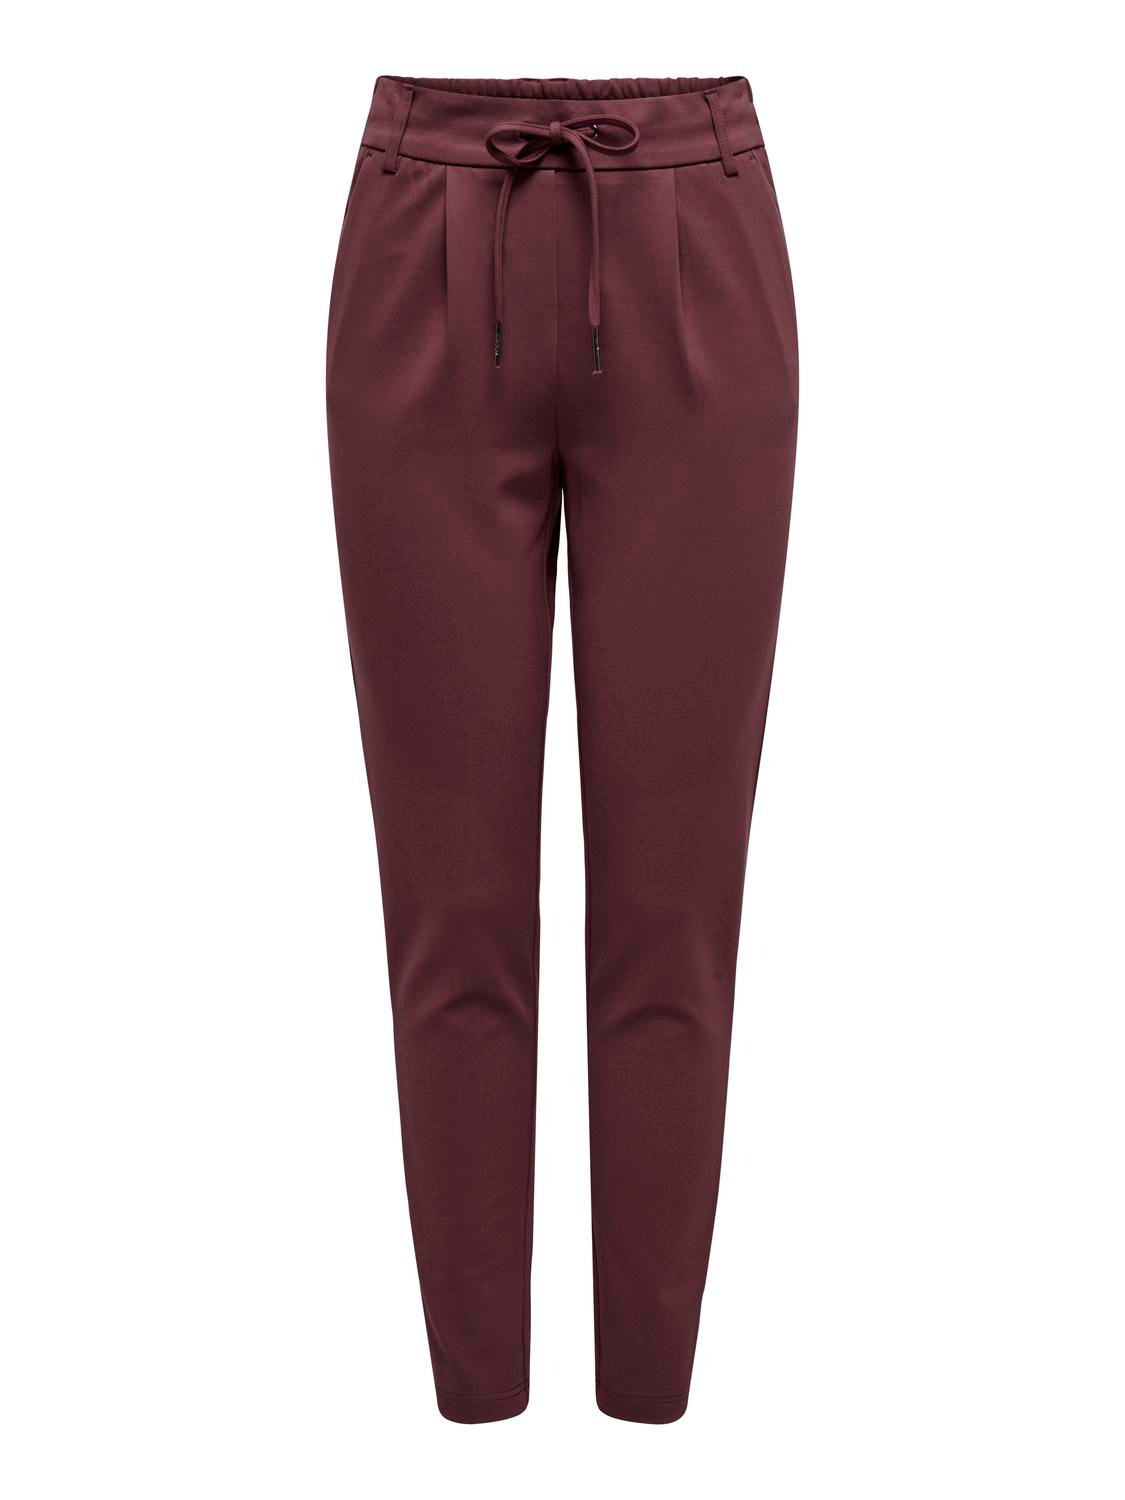 ONLY Regular Fit Trousers -Red Mahogany - 15115847